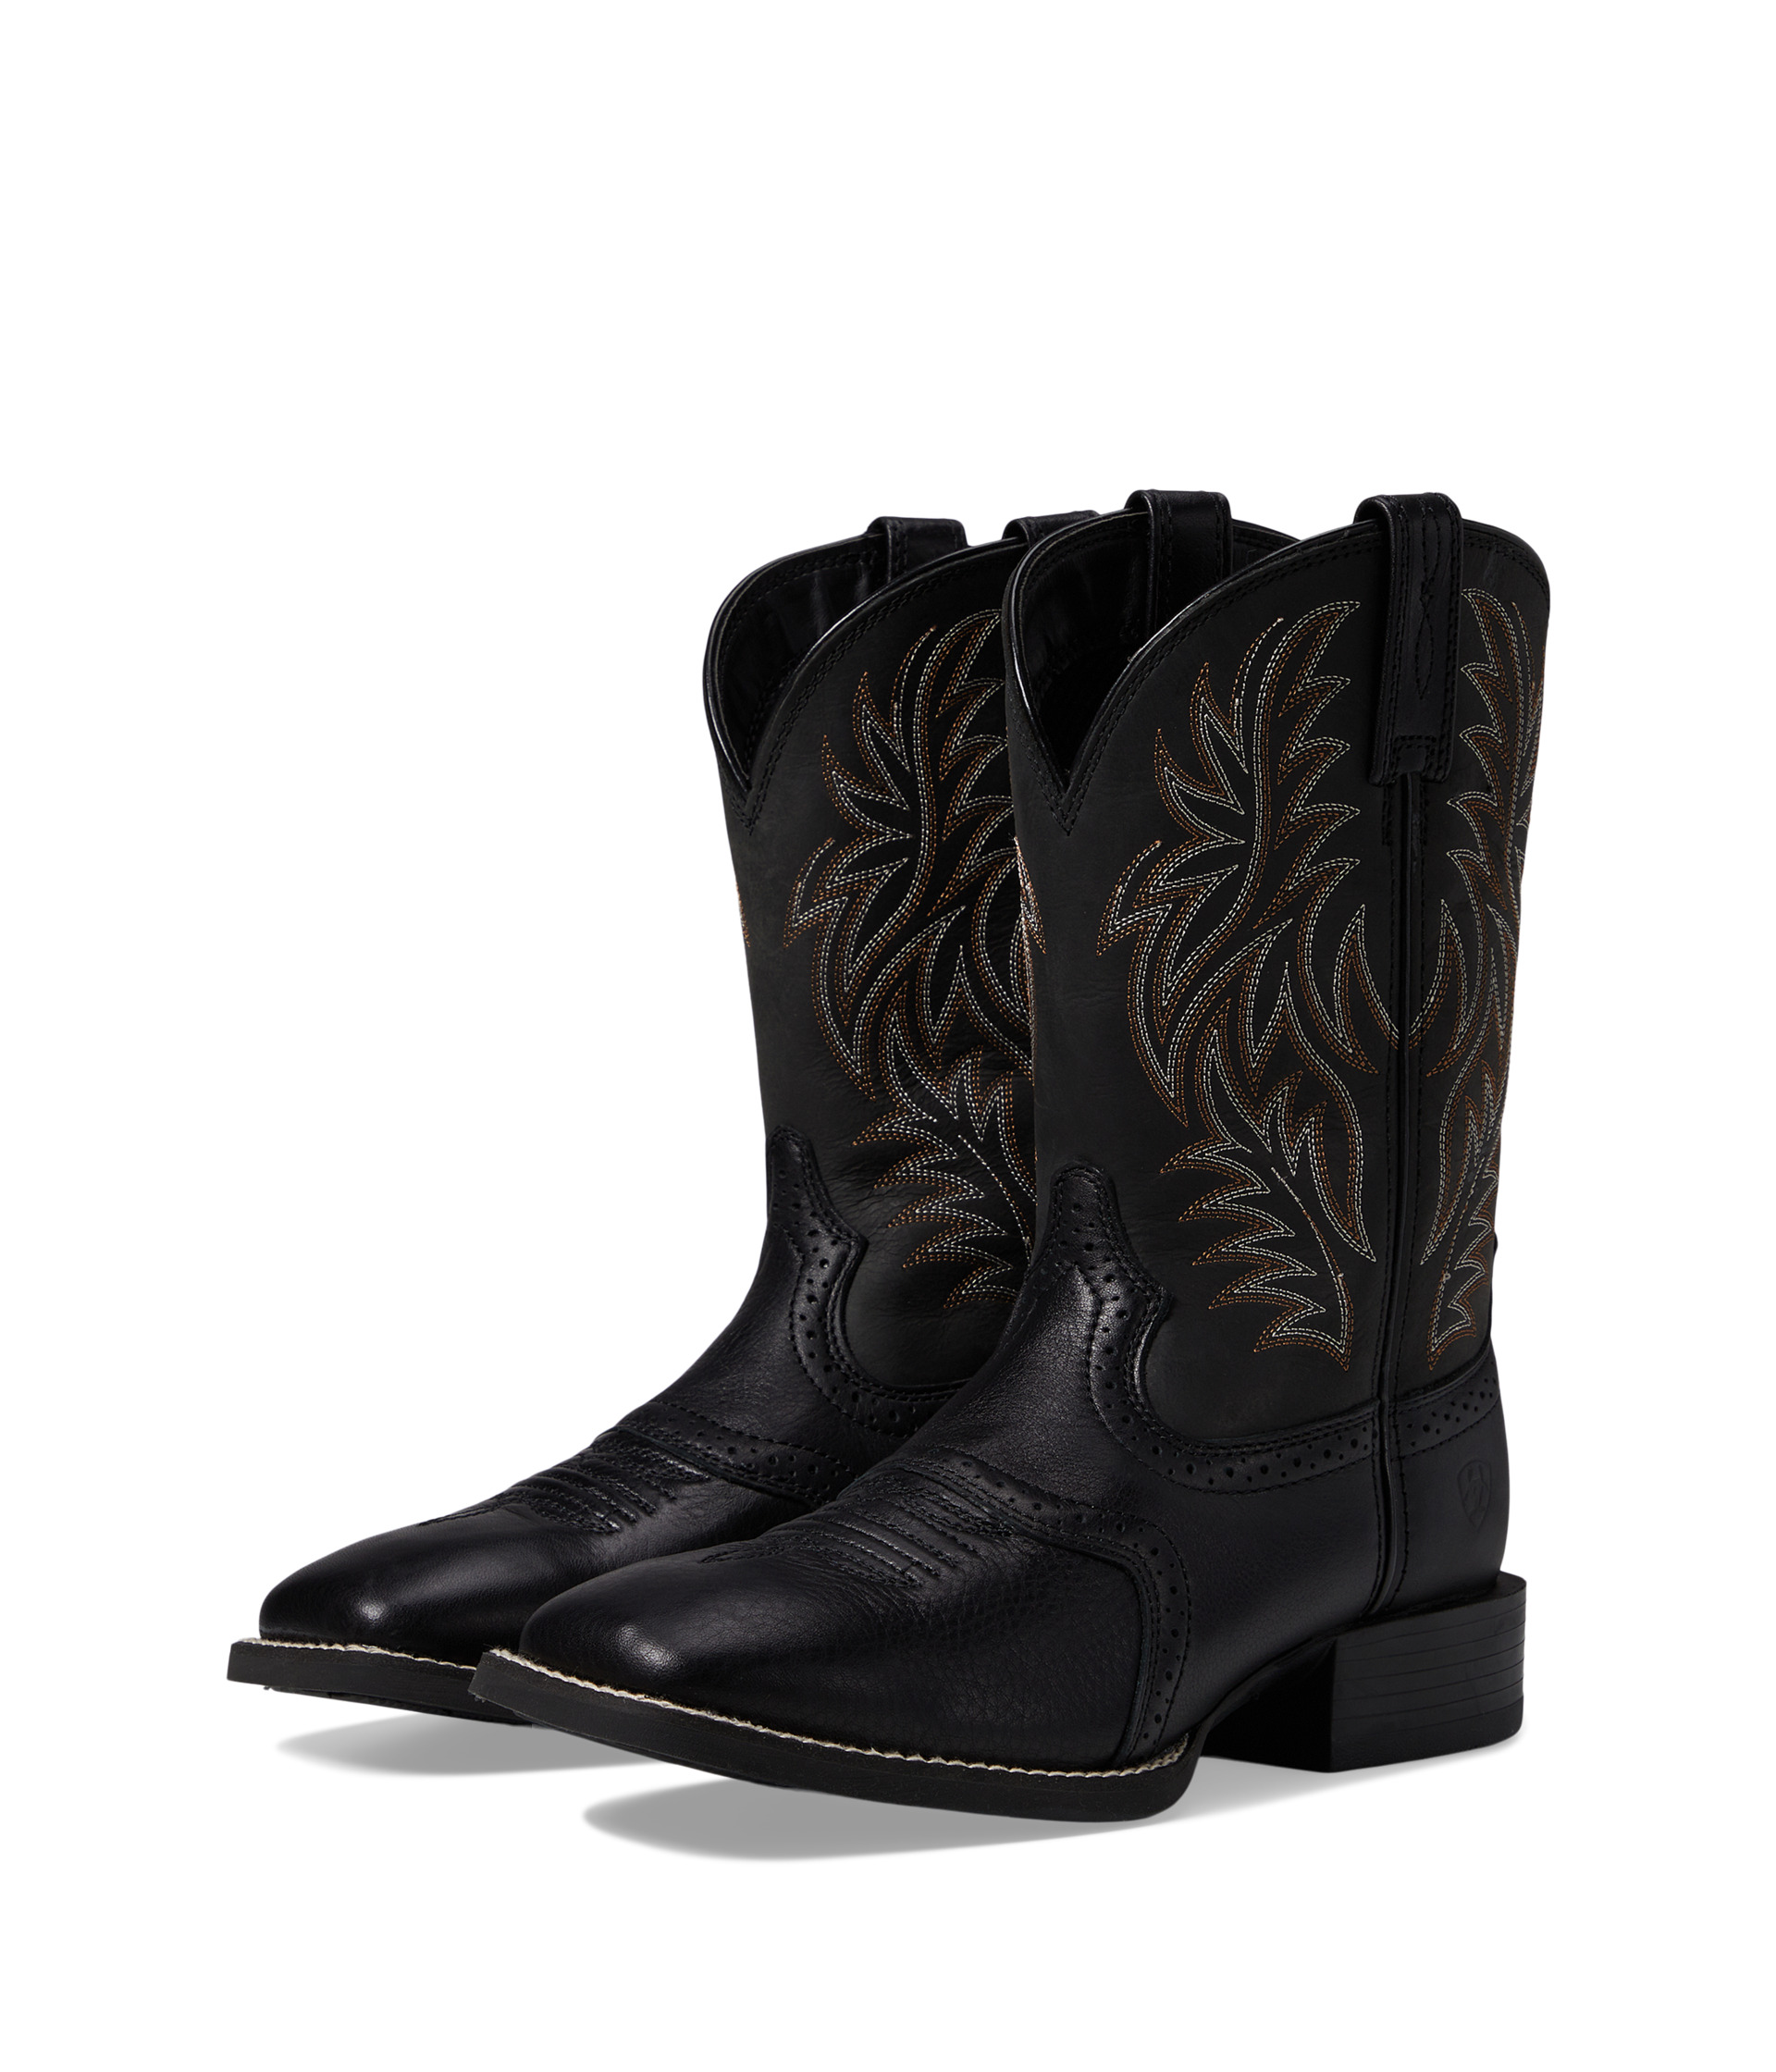 Ariat Sport Western Wide Square Toe at Zappos.com